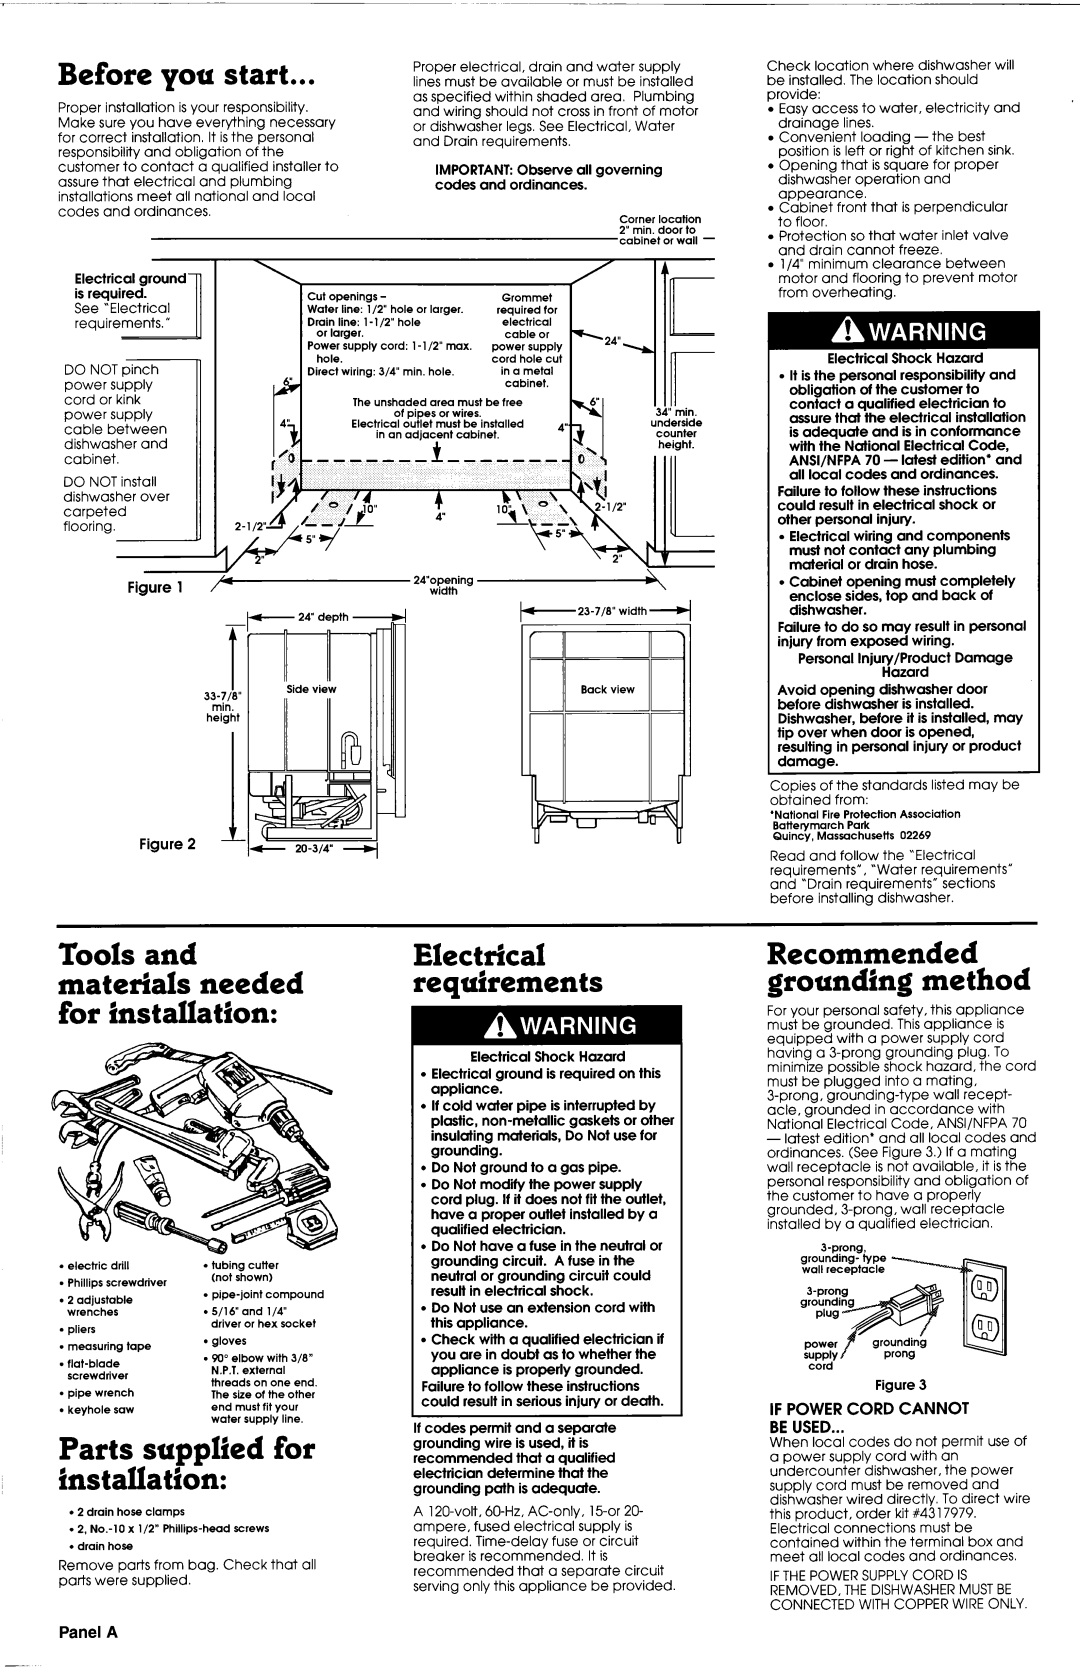 Whirlpool 3369092 REV. A installation instructions Before, start, If Powercord Cannot Be Used, Panel A, I24” 